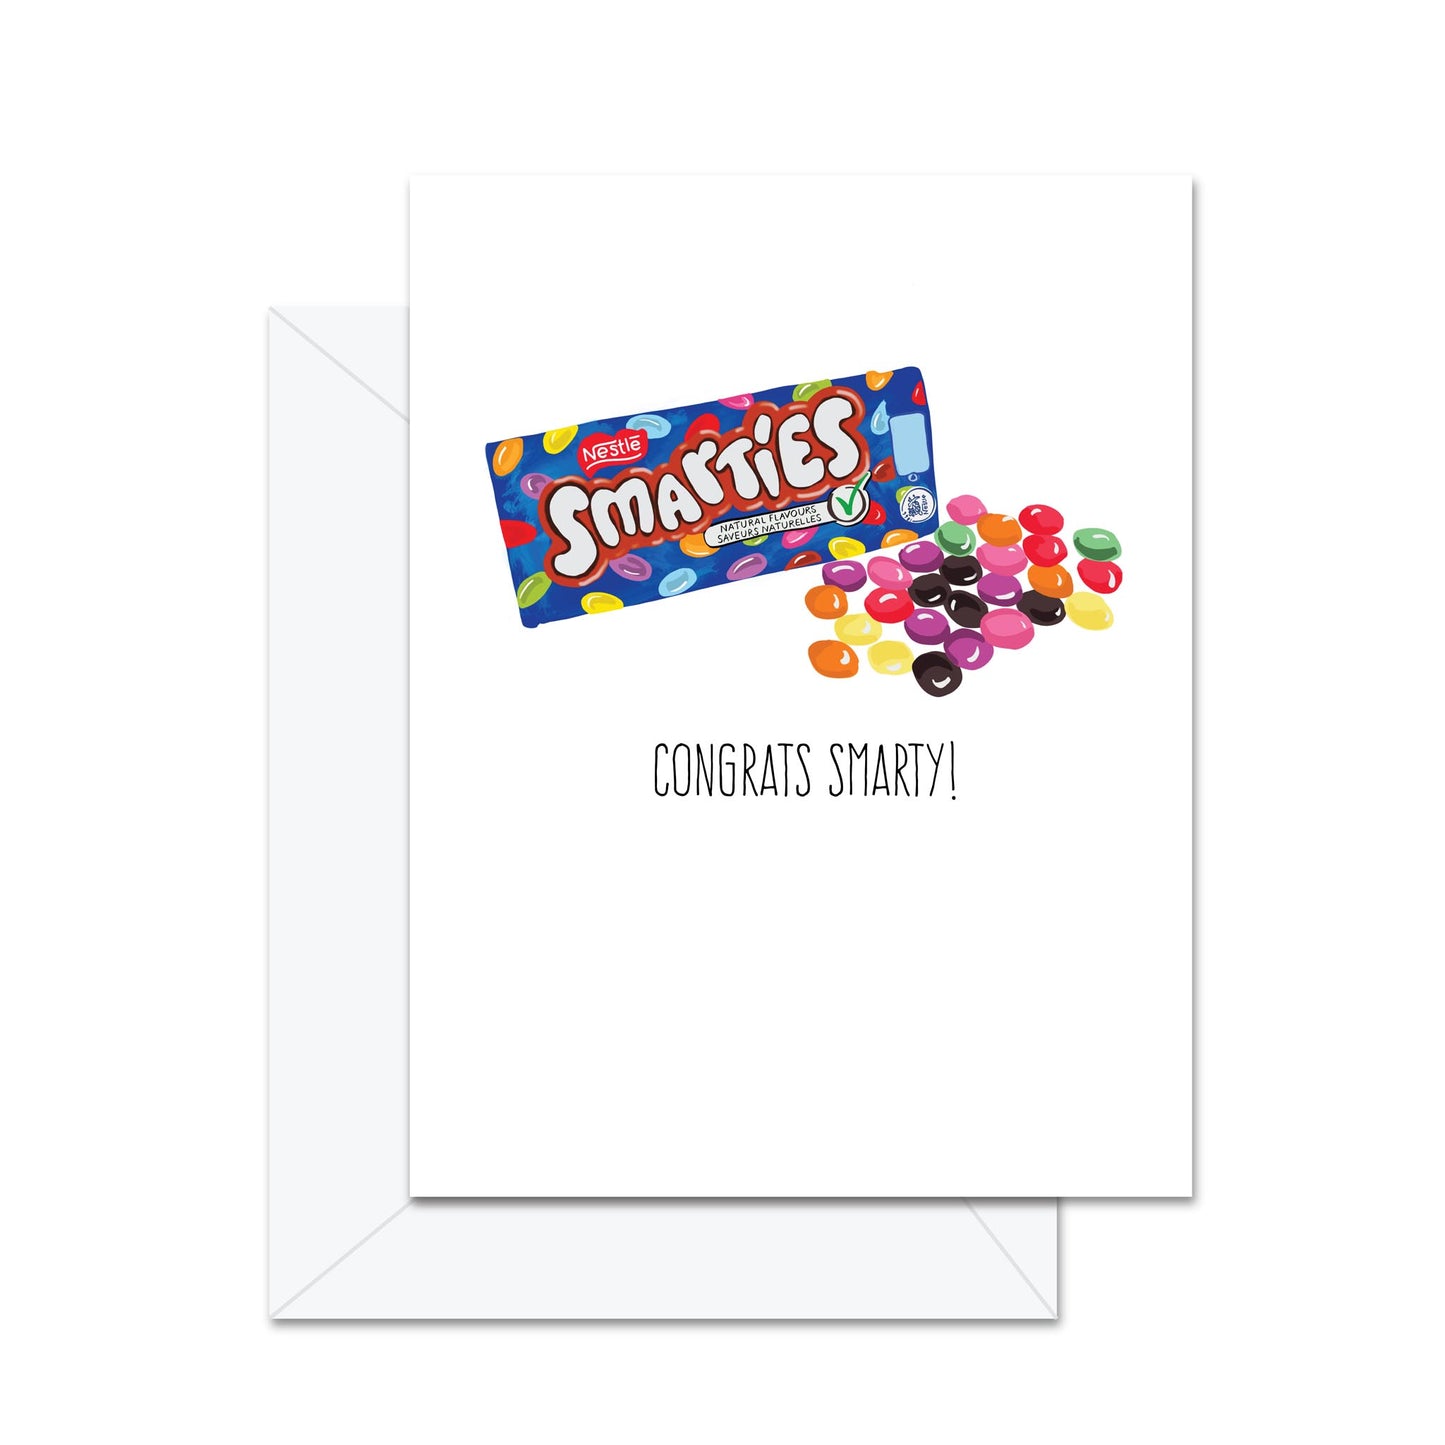 Congrats Smarty! - Greeting Card